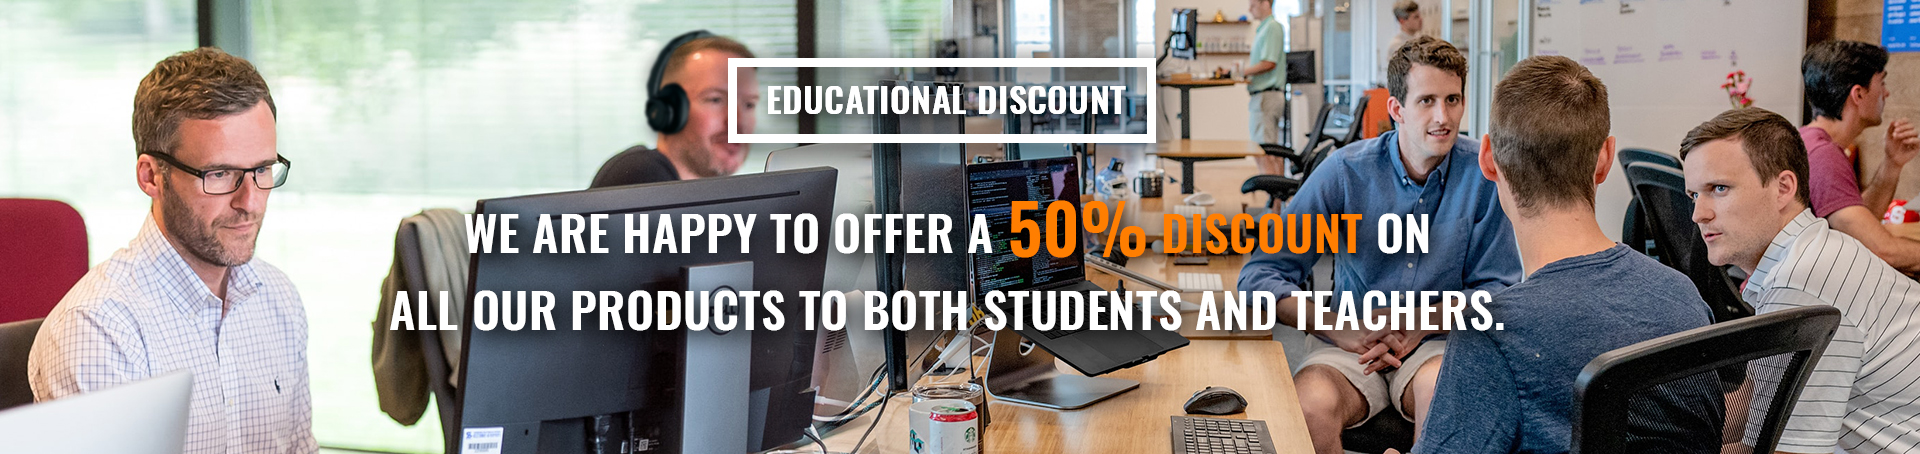 Educational discount. We are happy to offer a 50% discount on all our products to both students and teachers.